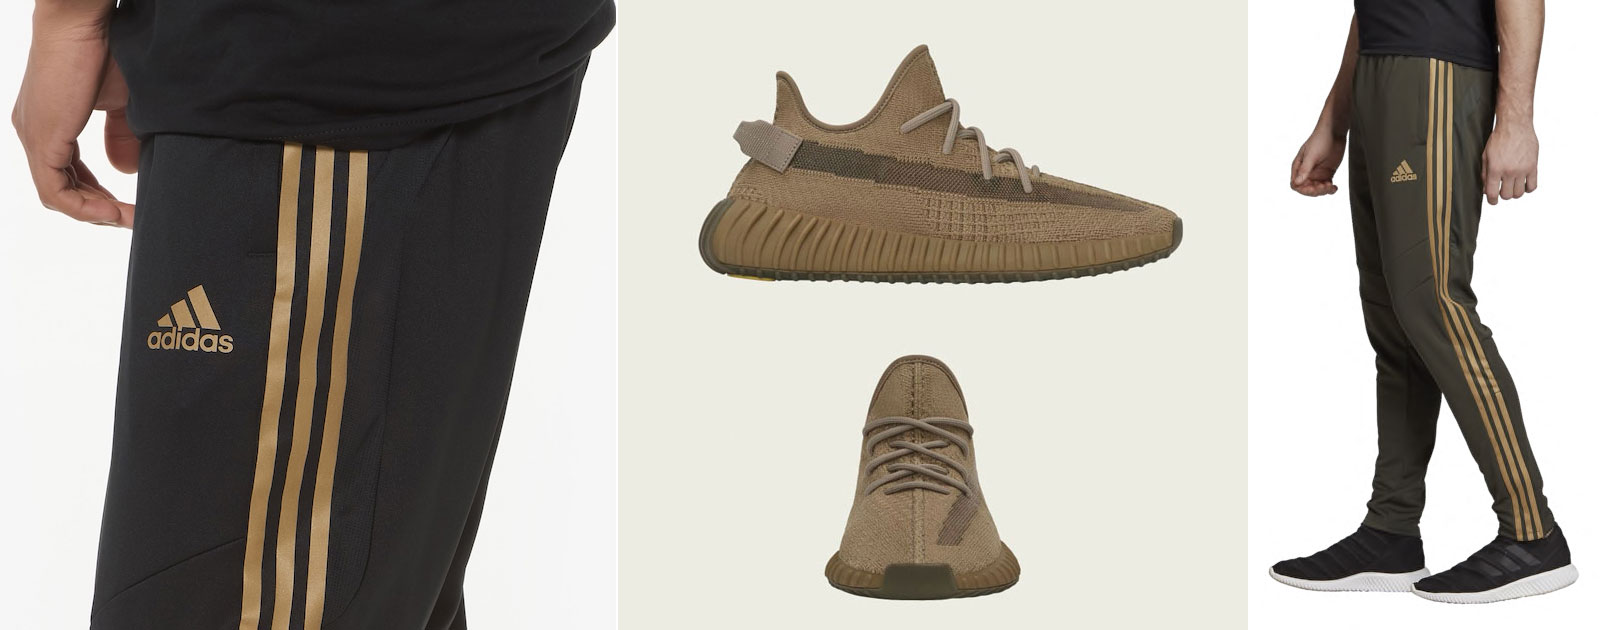 yeezy earth outfit